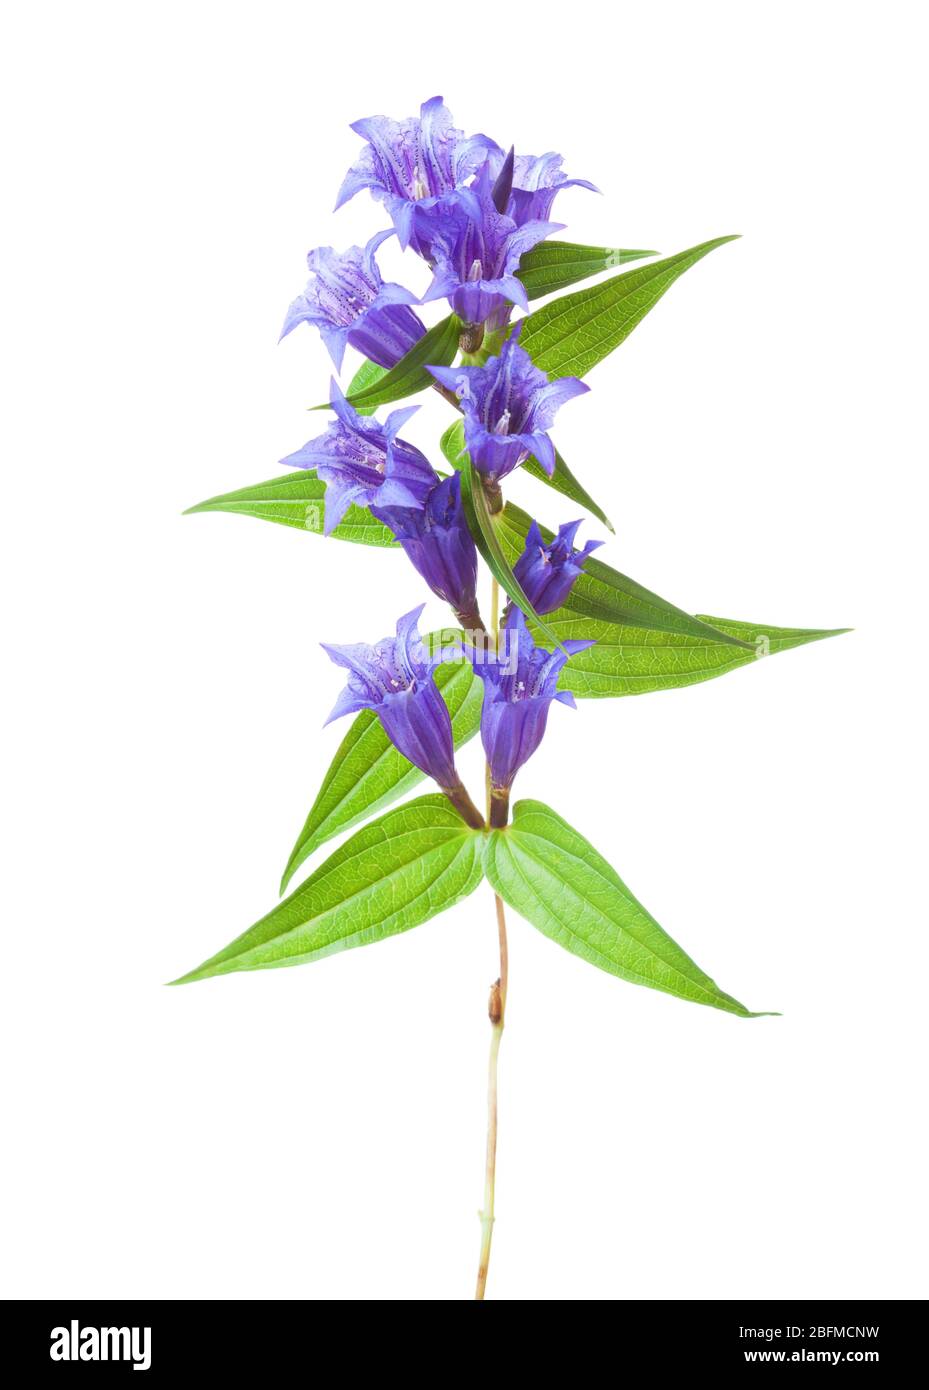 Branch with flowers of Gentiana Asclepiadea (Willow Gentian)  isolated on white background. Stock Photo